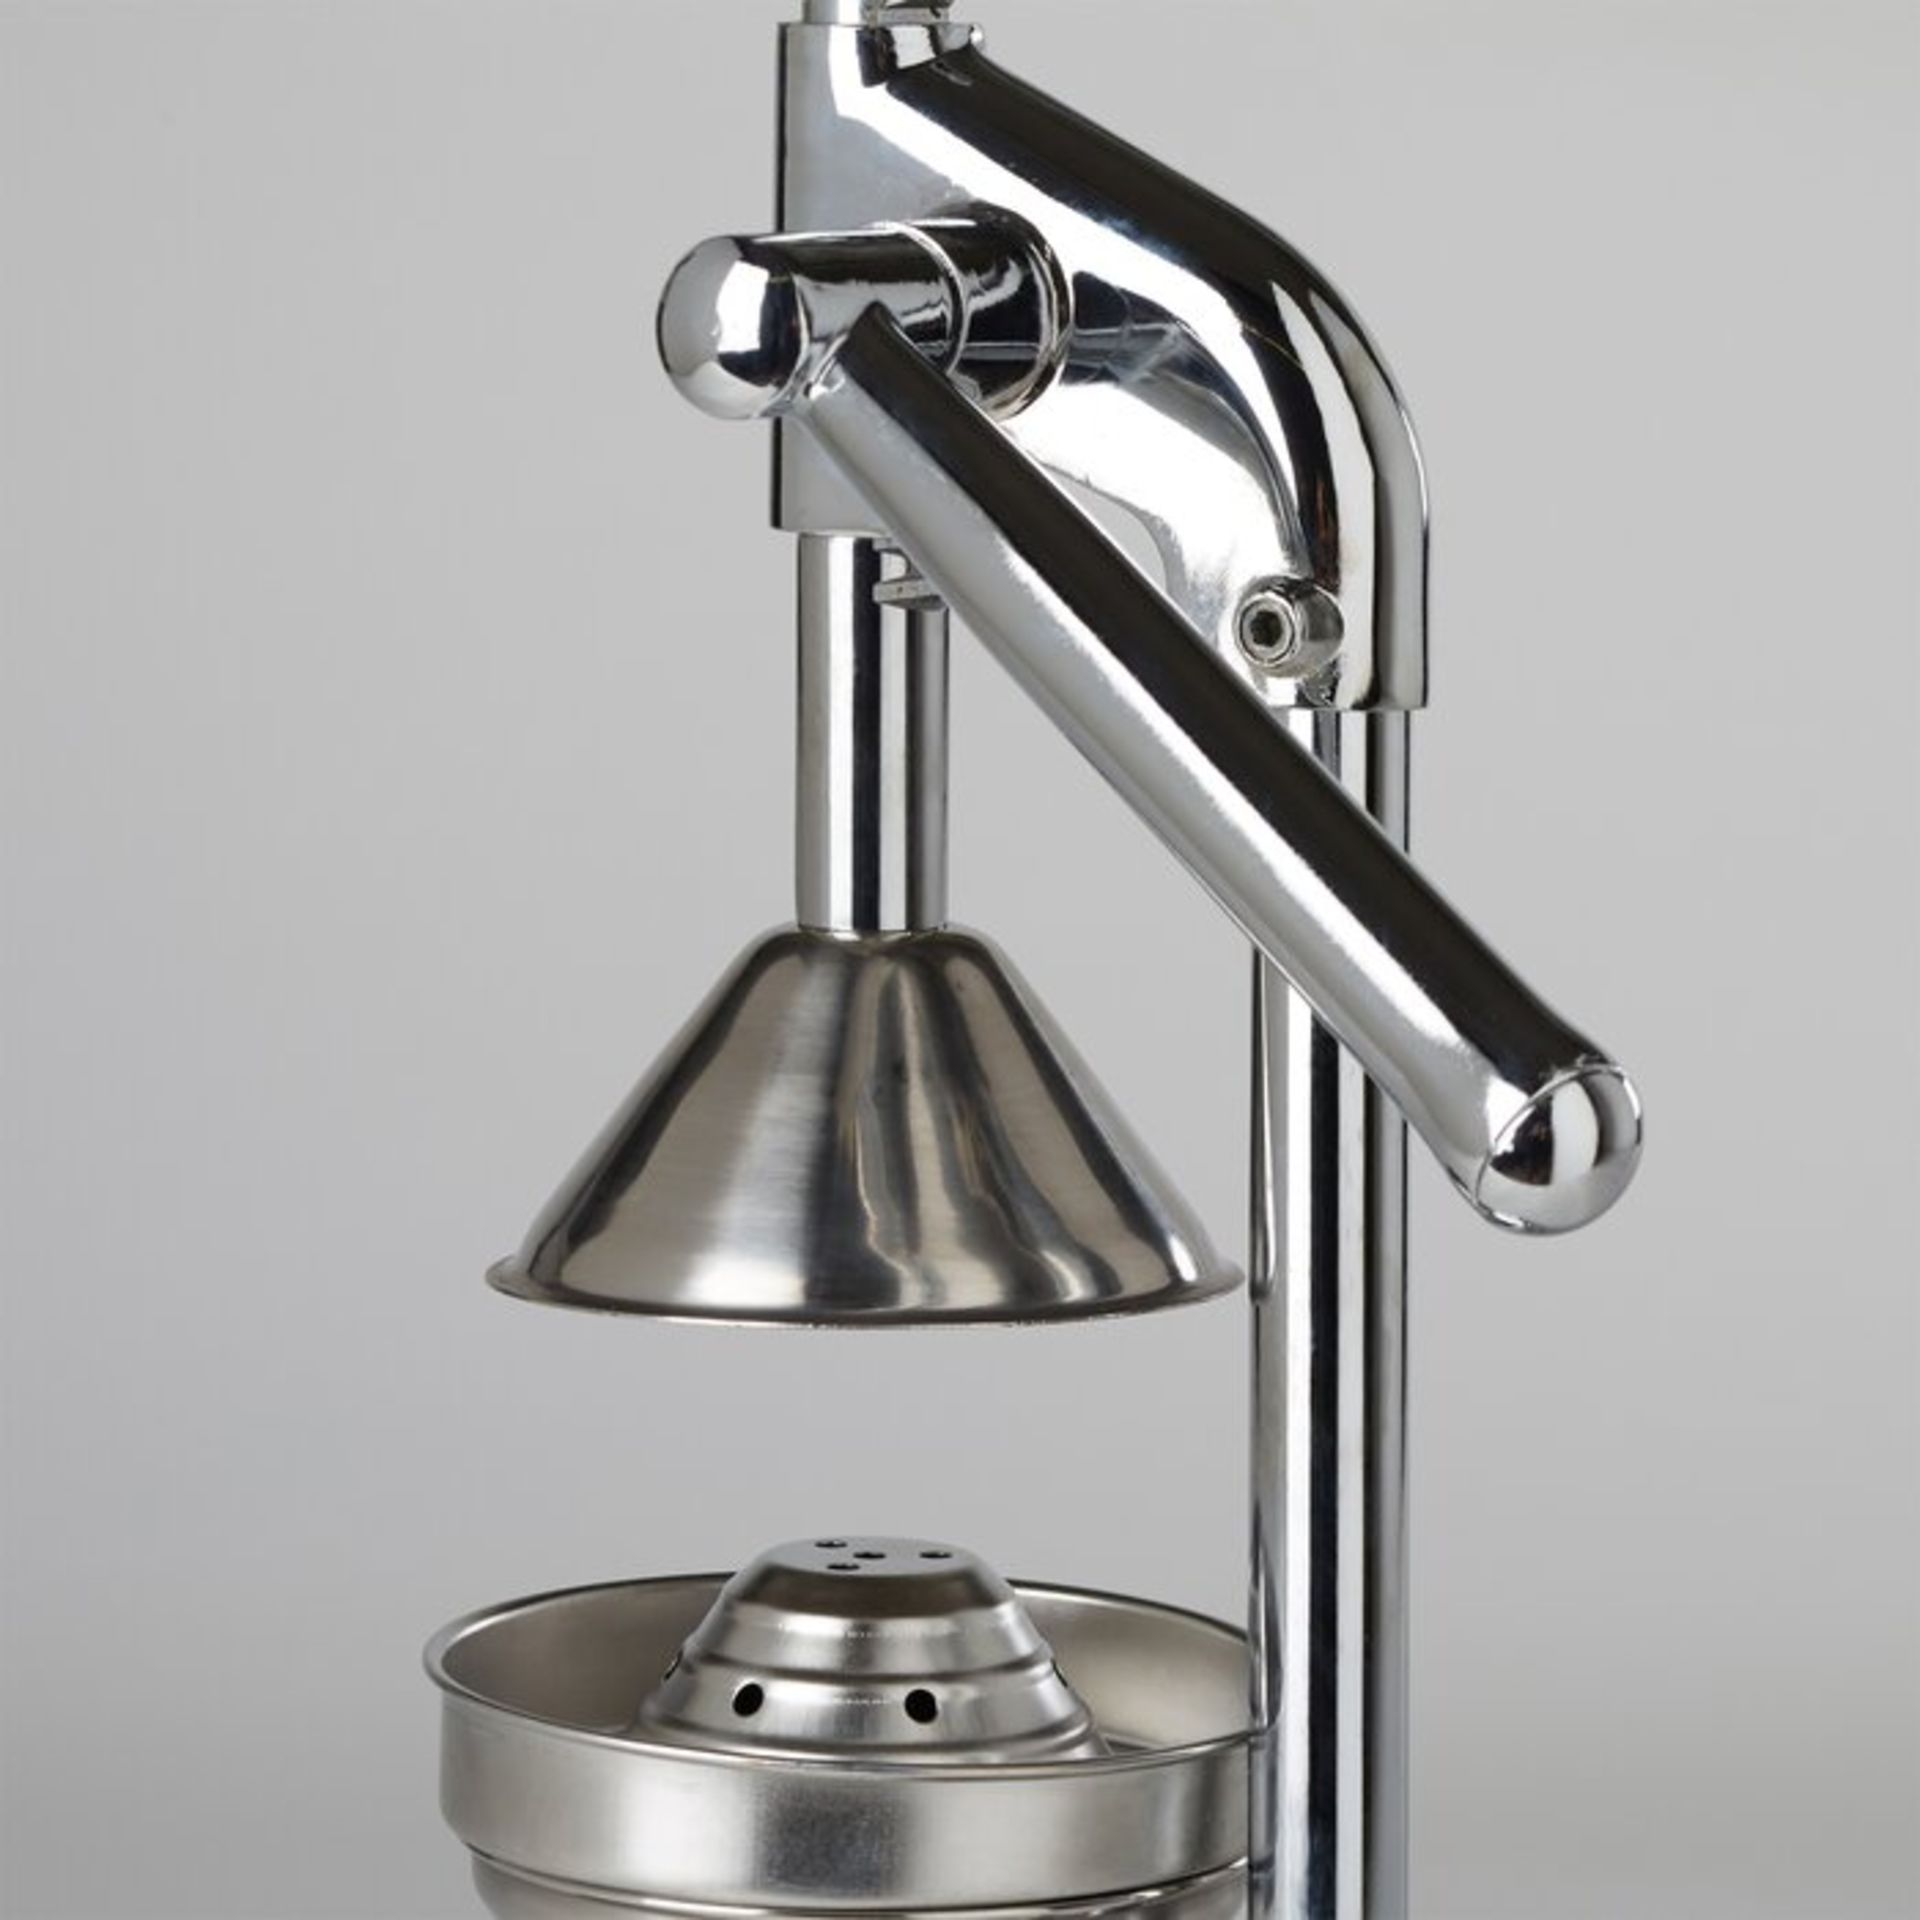 KitchenCraft Deluxe Chrome Plated Lever-Arm Juicer - RRP £34.99 - Image 2 of 2